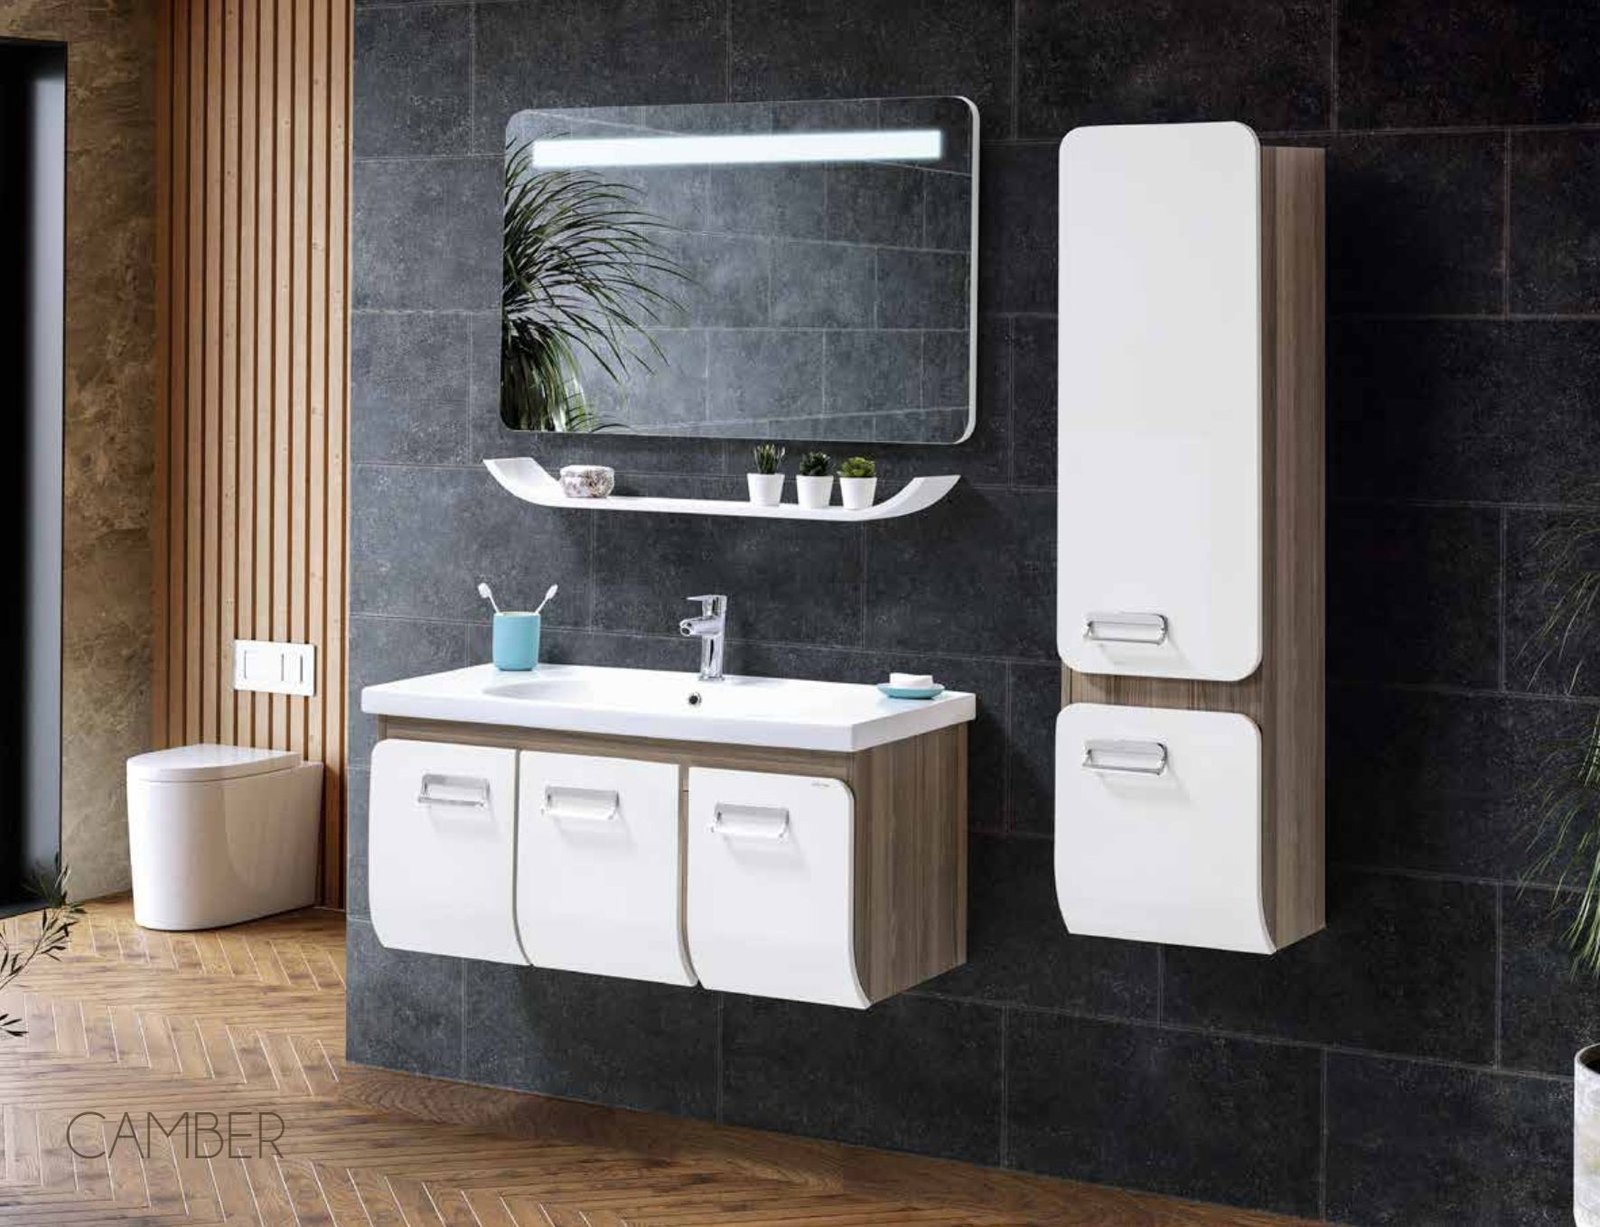 Bathroom Cabinets Hotel Furniture Manufacturer And Supplier In